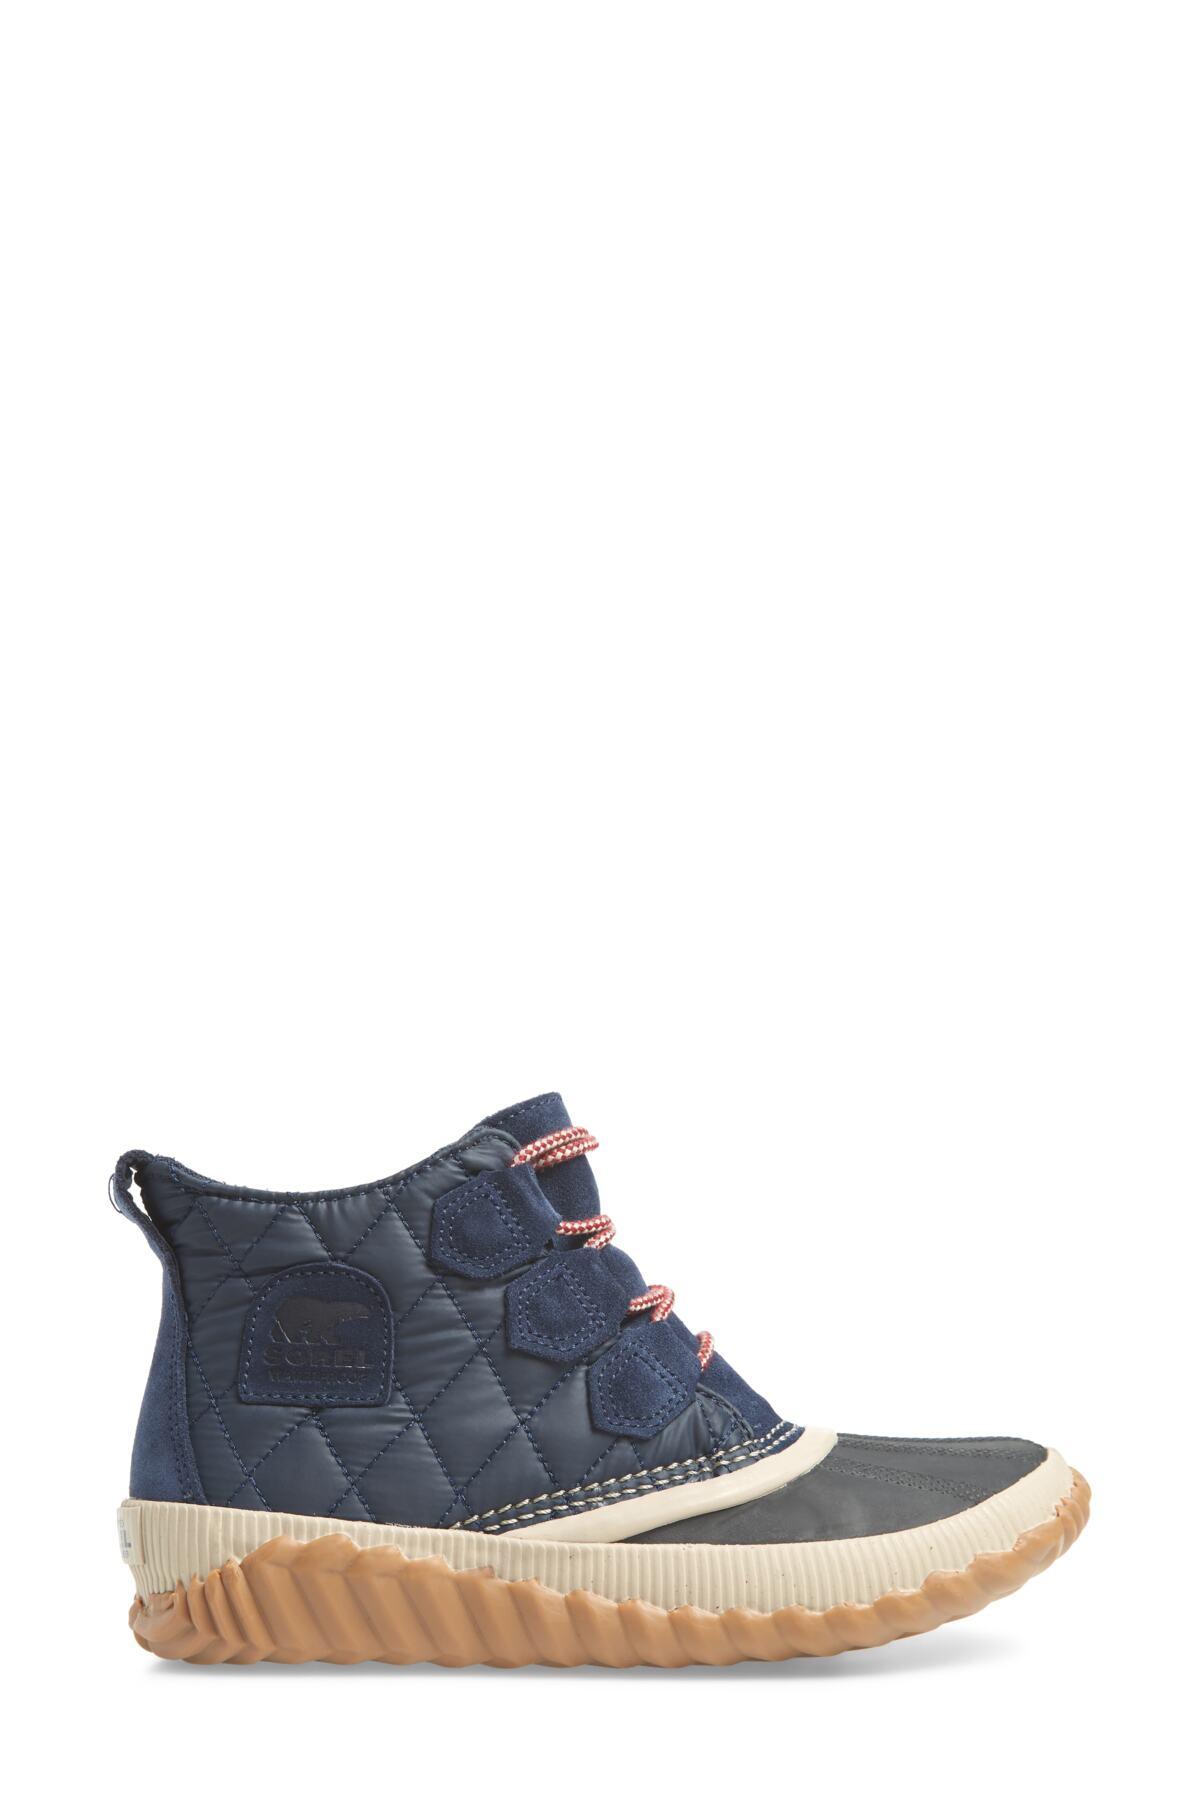 sorel out n about plus navy